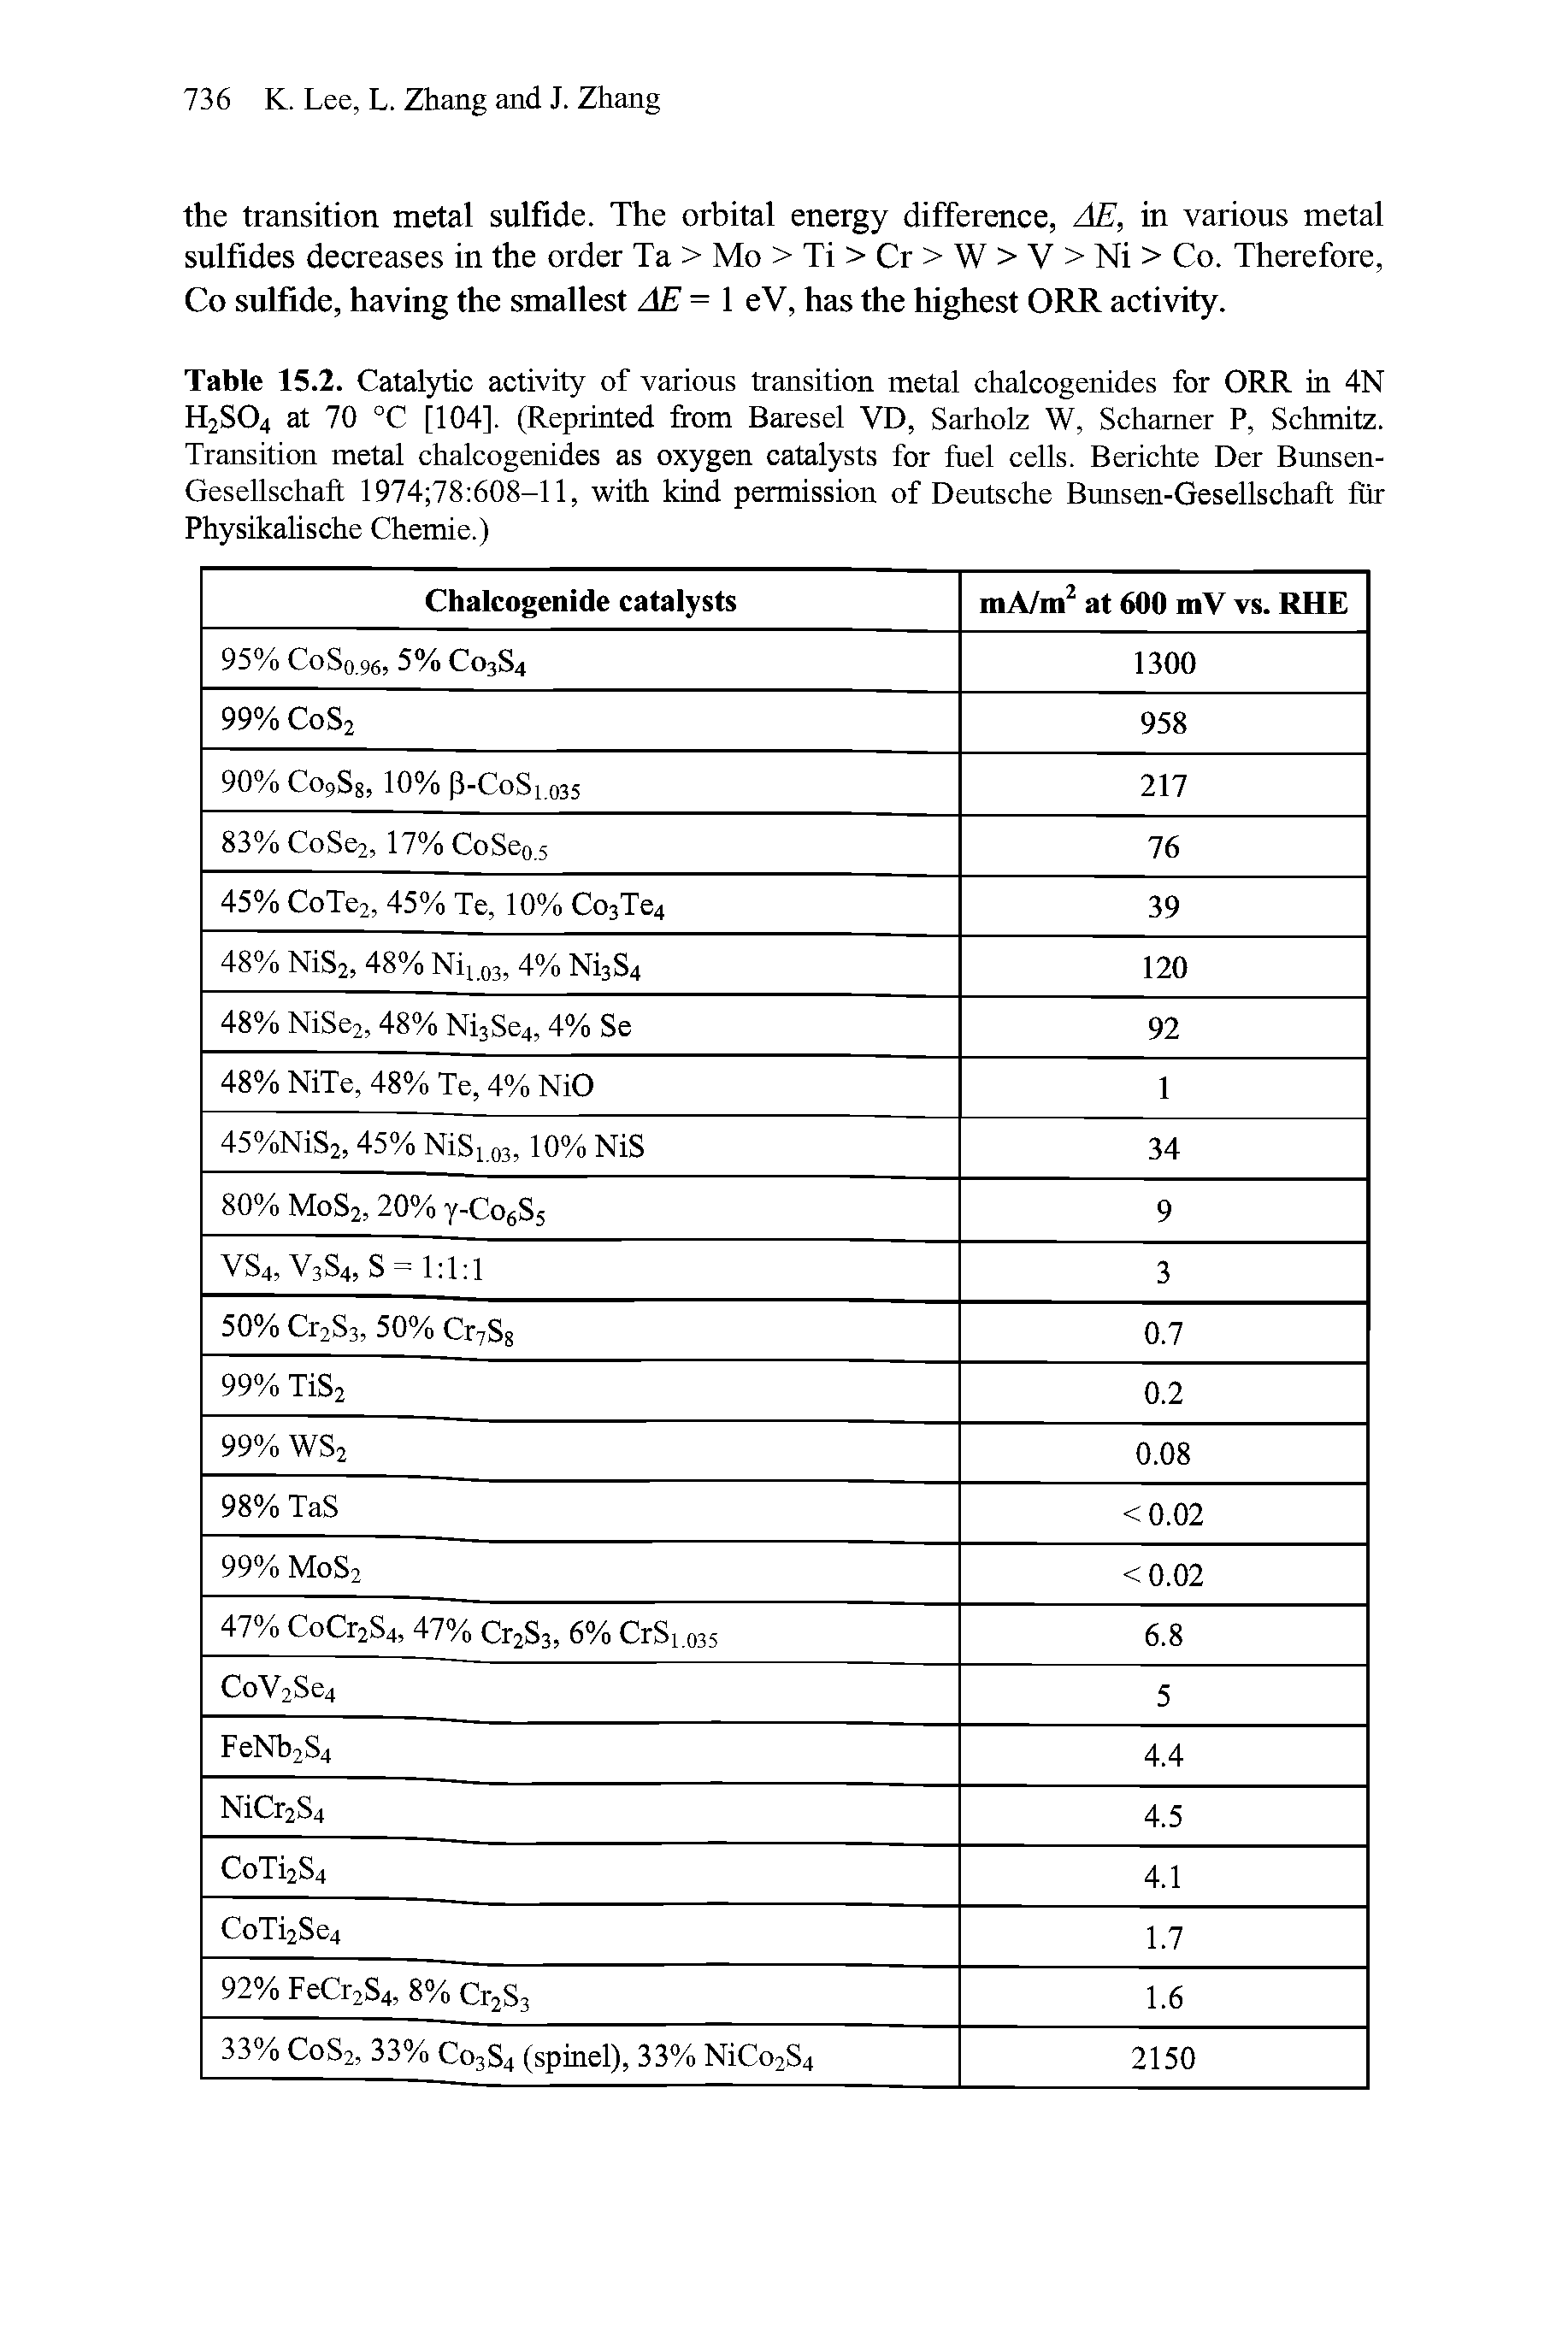 Table 15.2. Catalytic activity of various transition metal chalcogenides for ORR in 4N H2SO4 at 70 °C [104]. (Reprinted from Baresel VD, Sarholz W, Schamer P, Schmitz. Transition metal chalcogenides as oxygen catalysts for fuel cells. Berichte Der Bunsen-Gesellschaft 1974 78 608-11, with kind permission of Deutsche Bunsen-Gesellschaft fur Physikahsche Chemie.)...